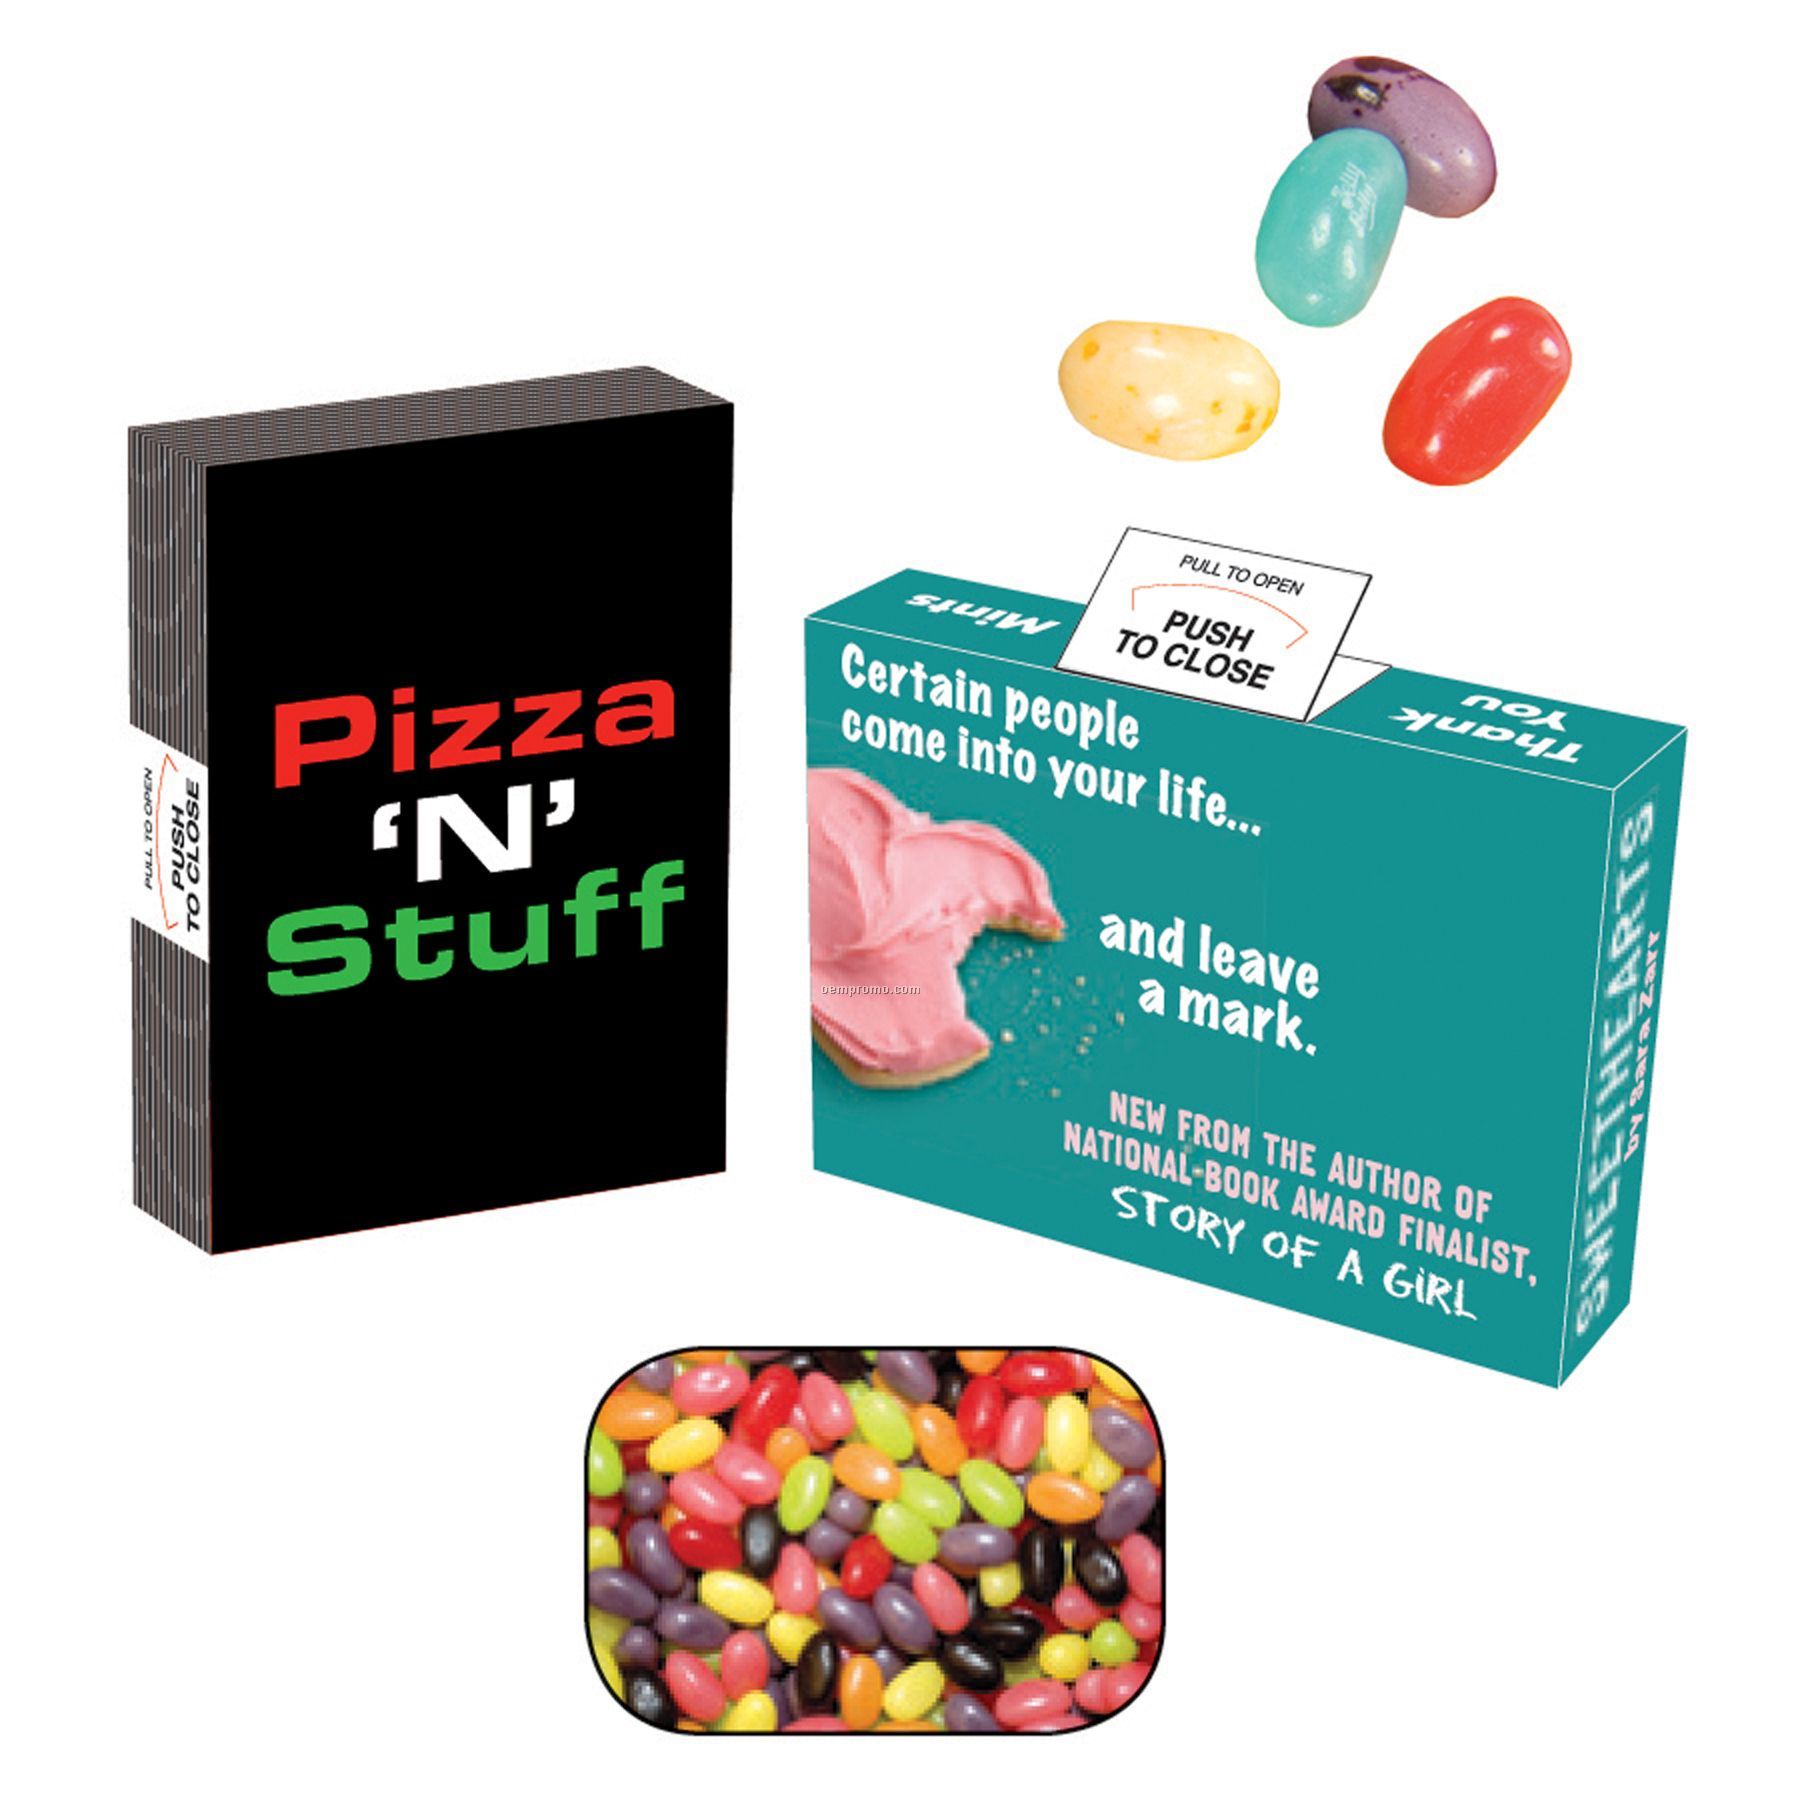 Advertising Mint, Candy & Gum Box Filled With 20-25 Jelly Beans